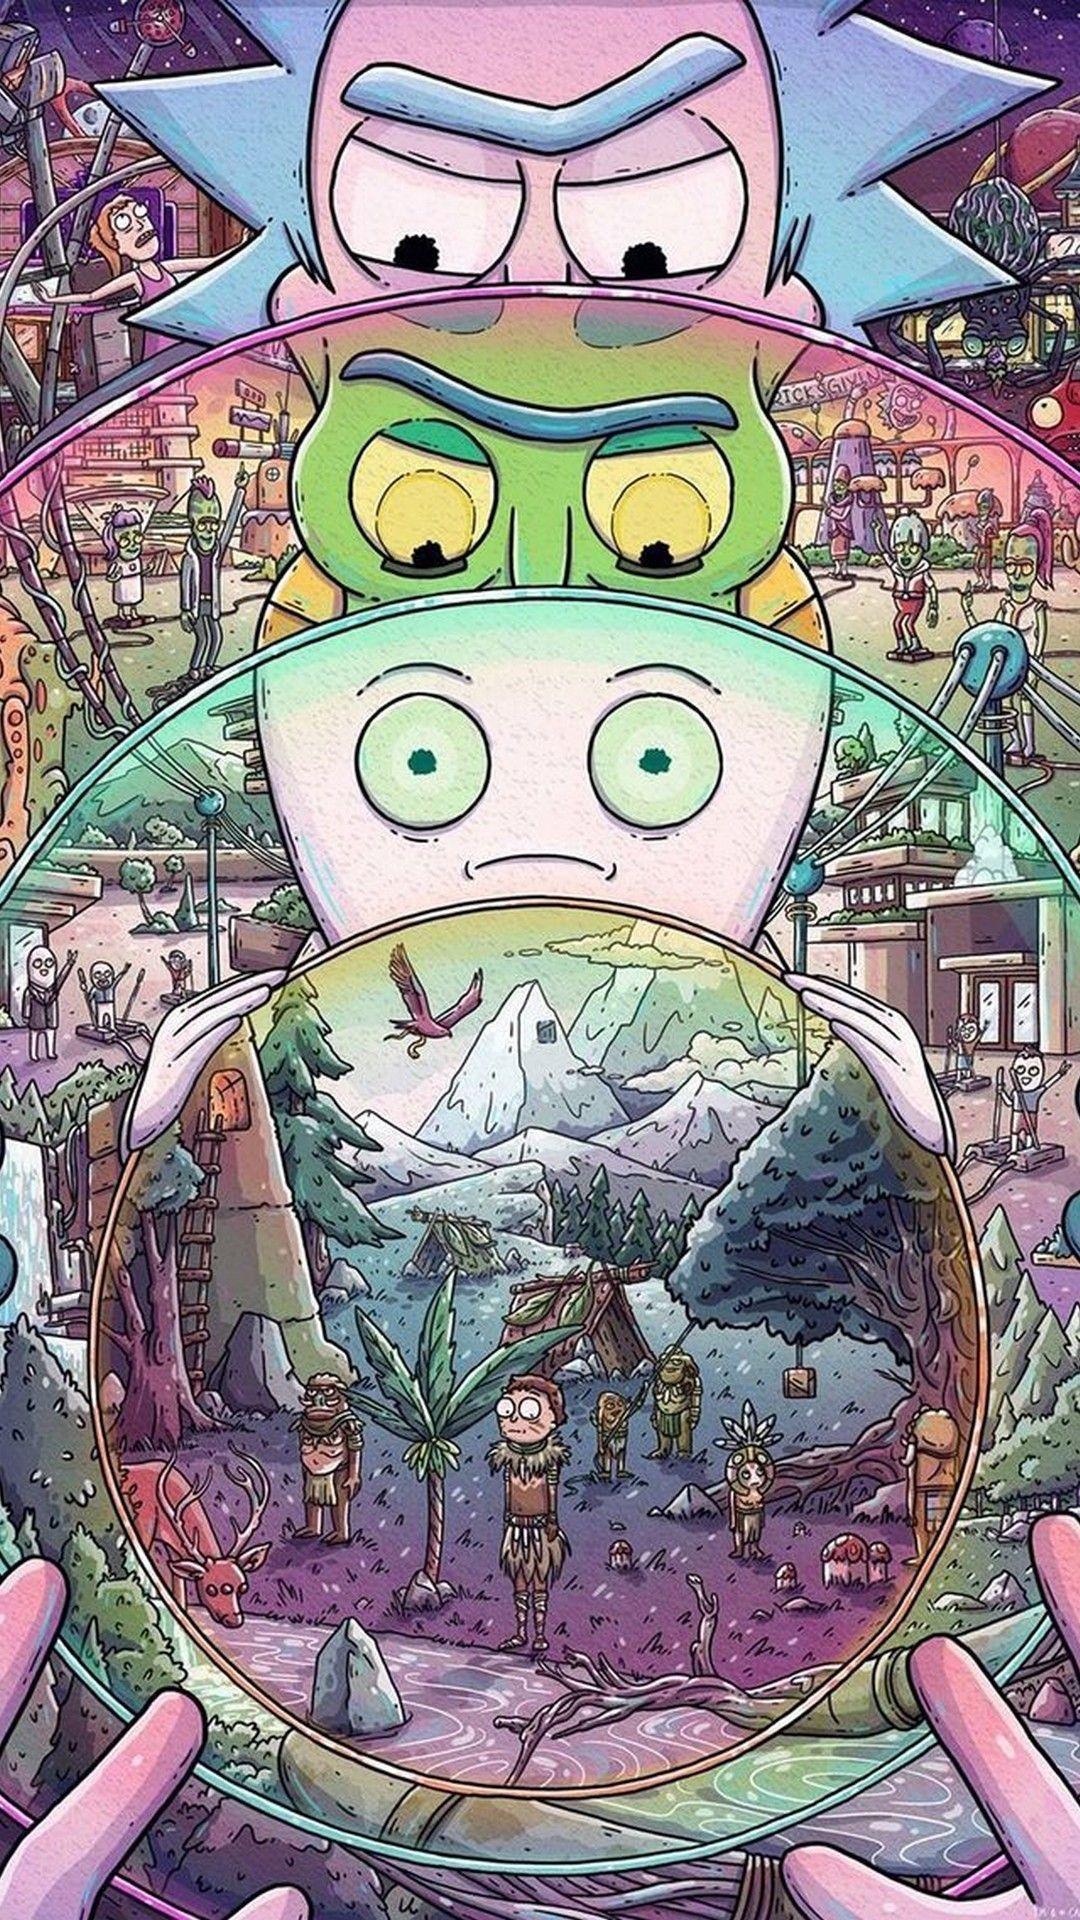 Best Rick and Morty Wallpaper Free Best Rick